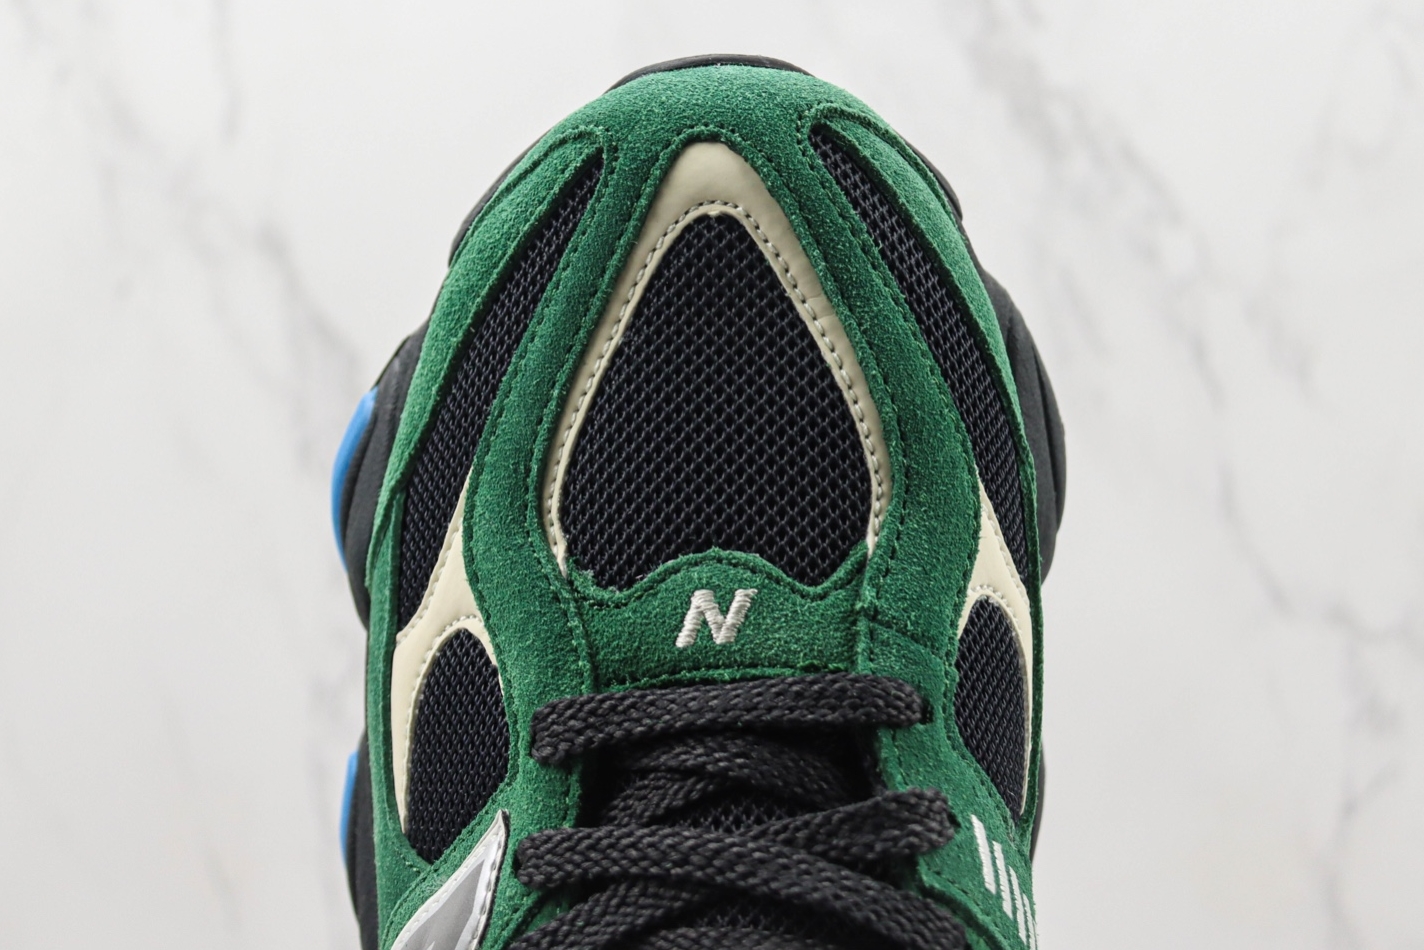 New Balance 9060 'Team Forest Green' U9060VRA - The Perfect Blend of Style and Performance